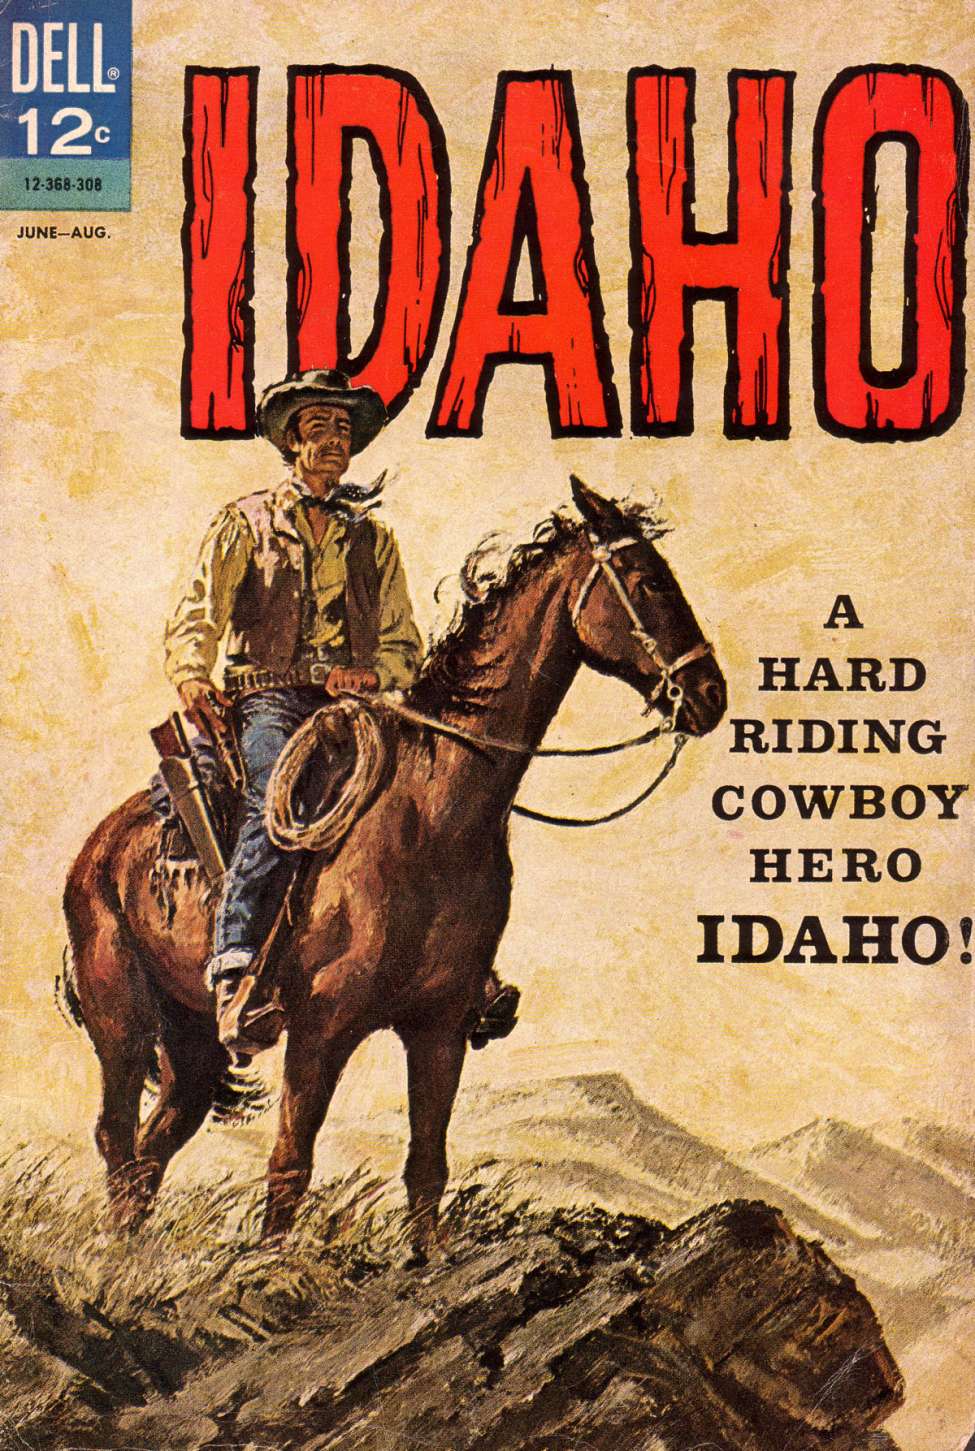 Book Cover For Idaho 1